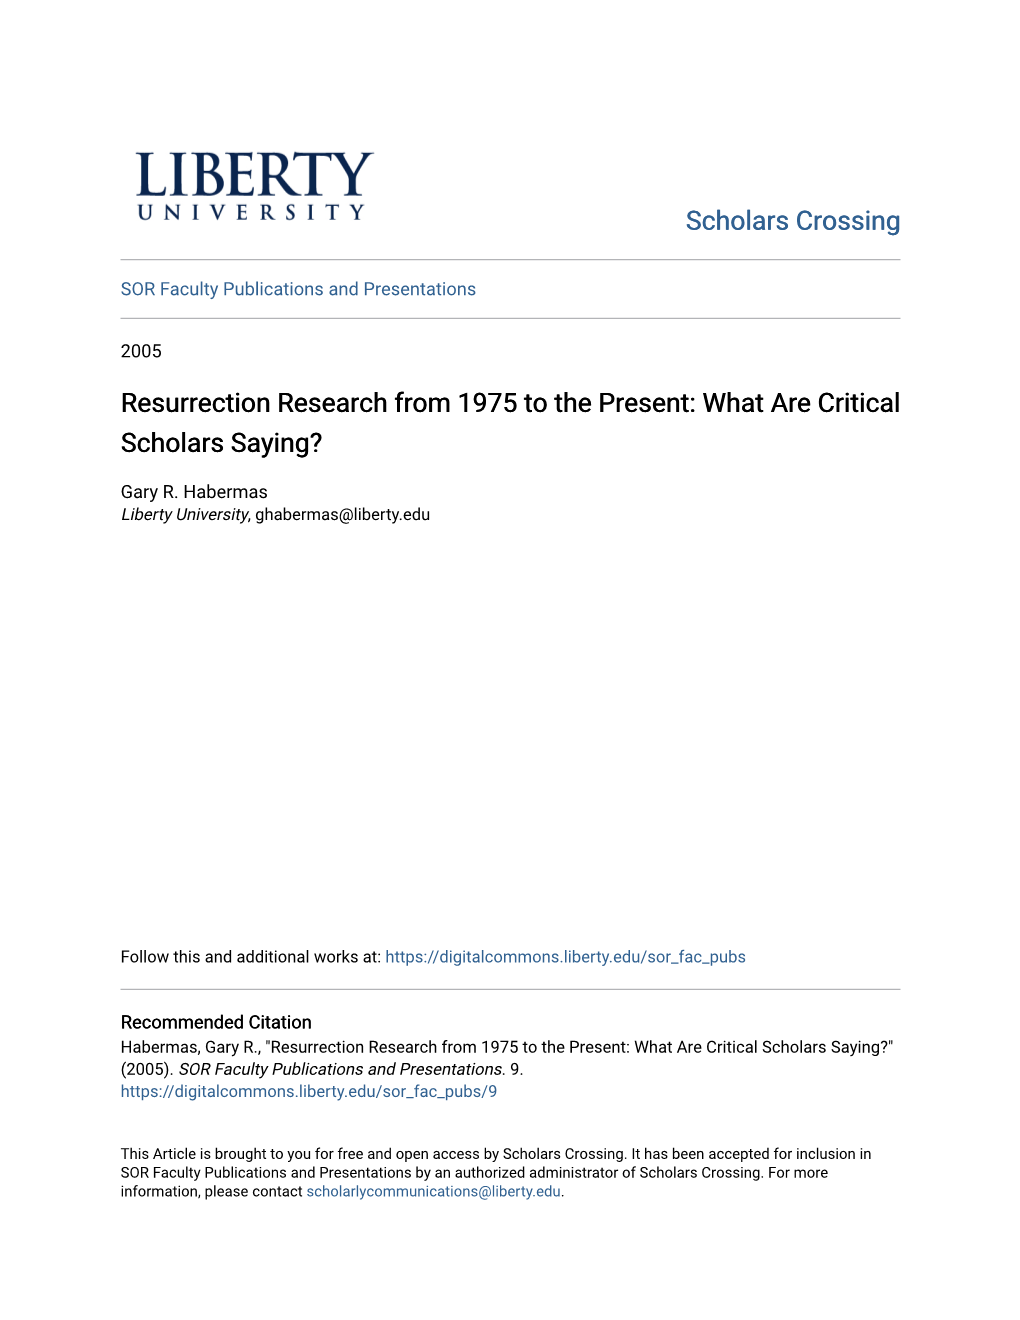 Resurrection Research from 1975 to the Present: What Are Critical Scholars Saying?